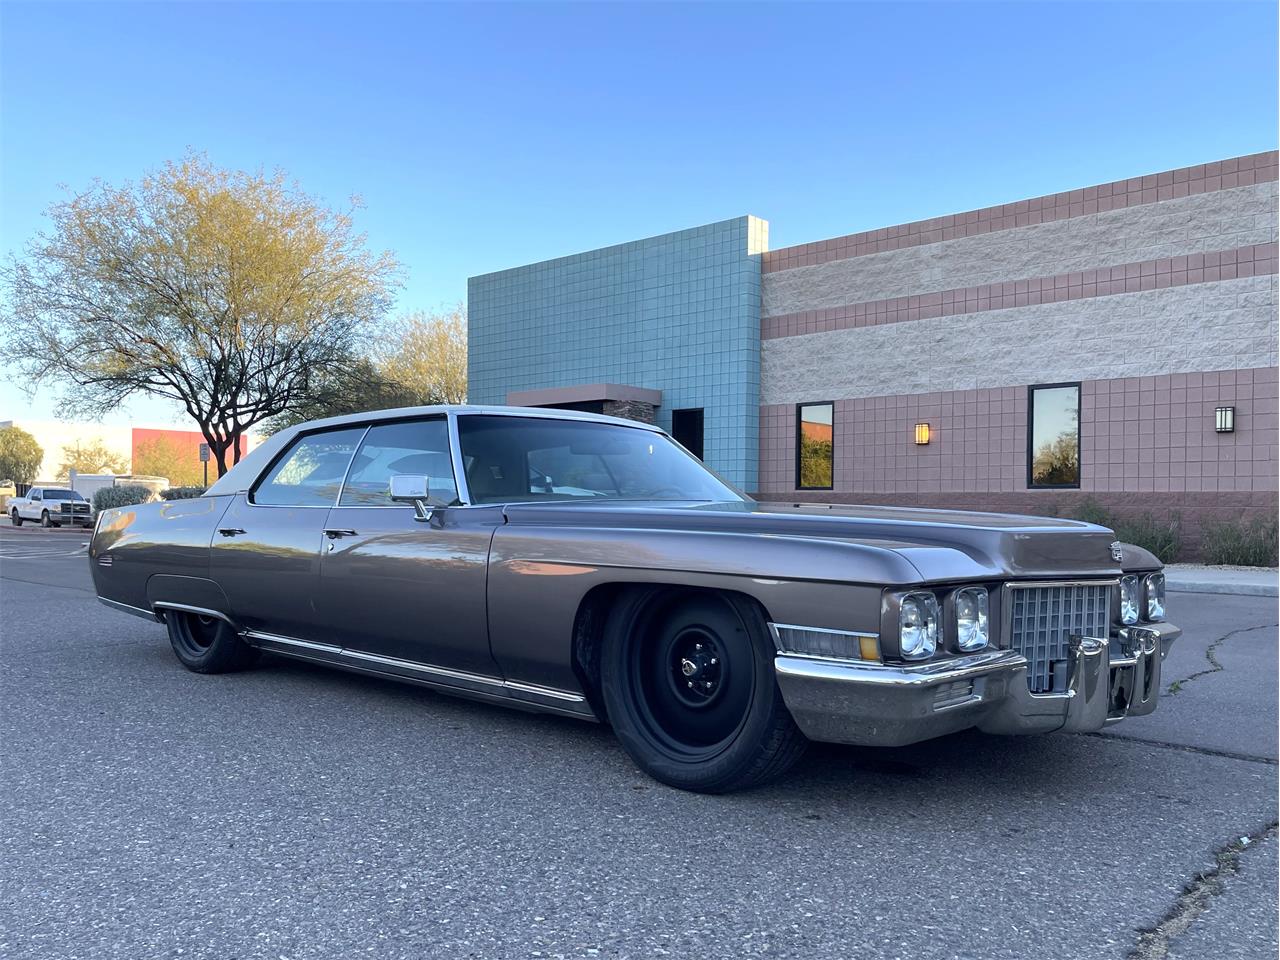 For Sale: 1970 Cadillac Flee2od in Scottsdale, Arizona for sale in Scottsdale, AZ